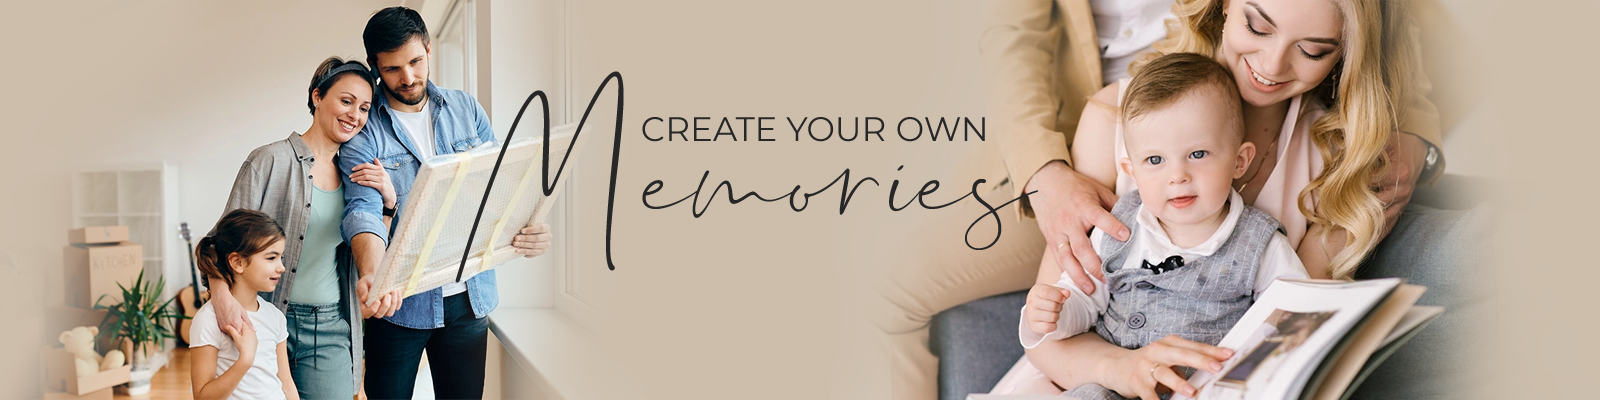 Create photo memories online with personalised photo gifts from Rapid Studio 